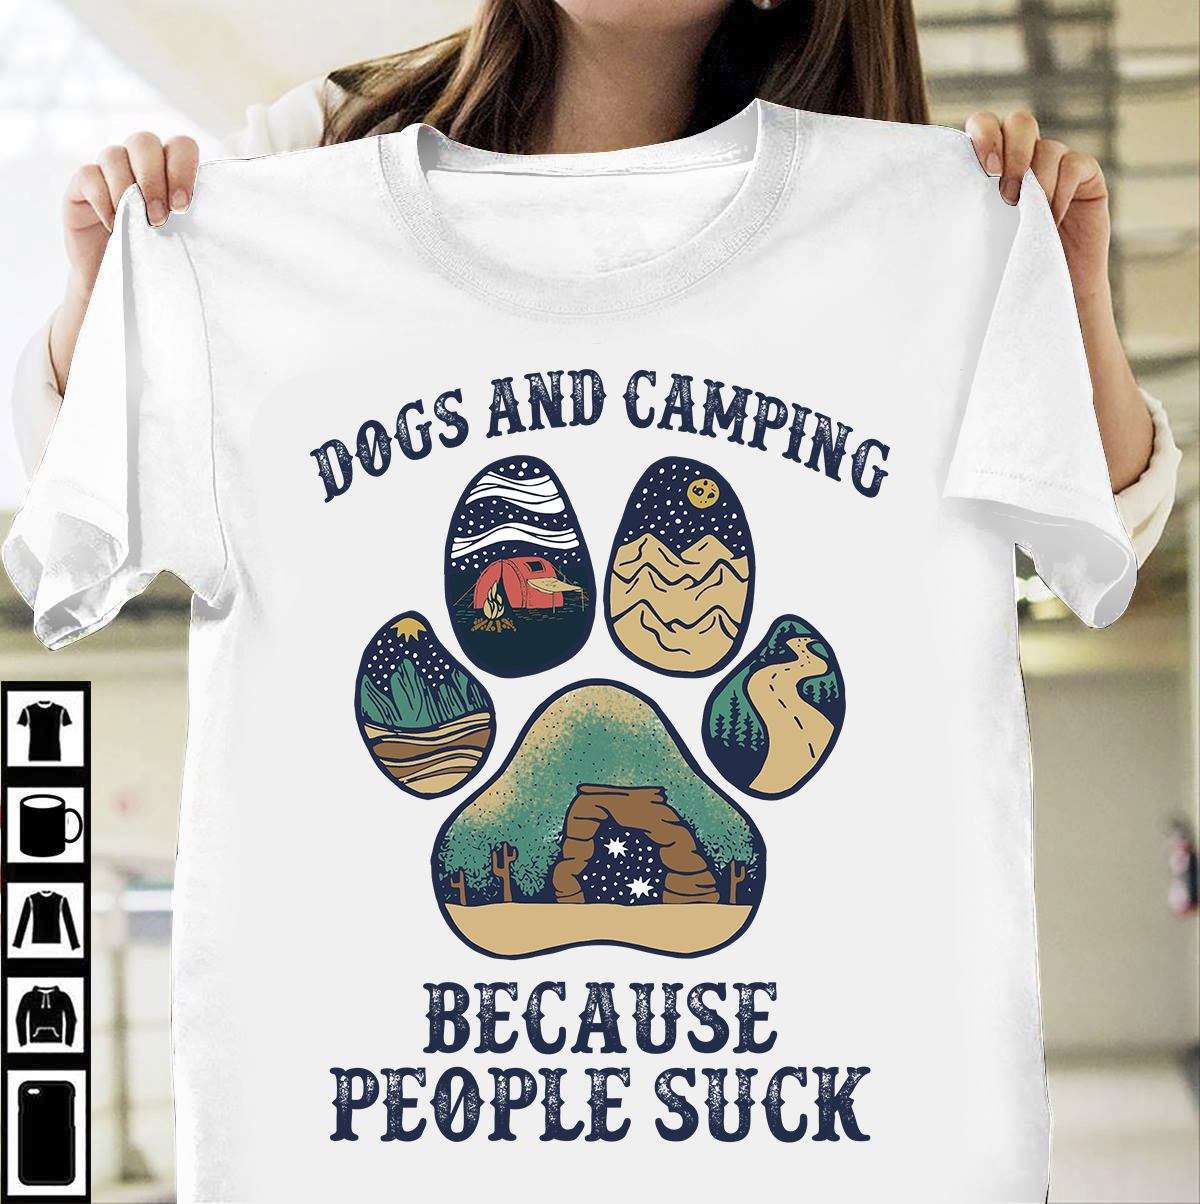 Dogs and camping because people suck - Camping with dogs